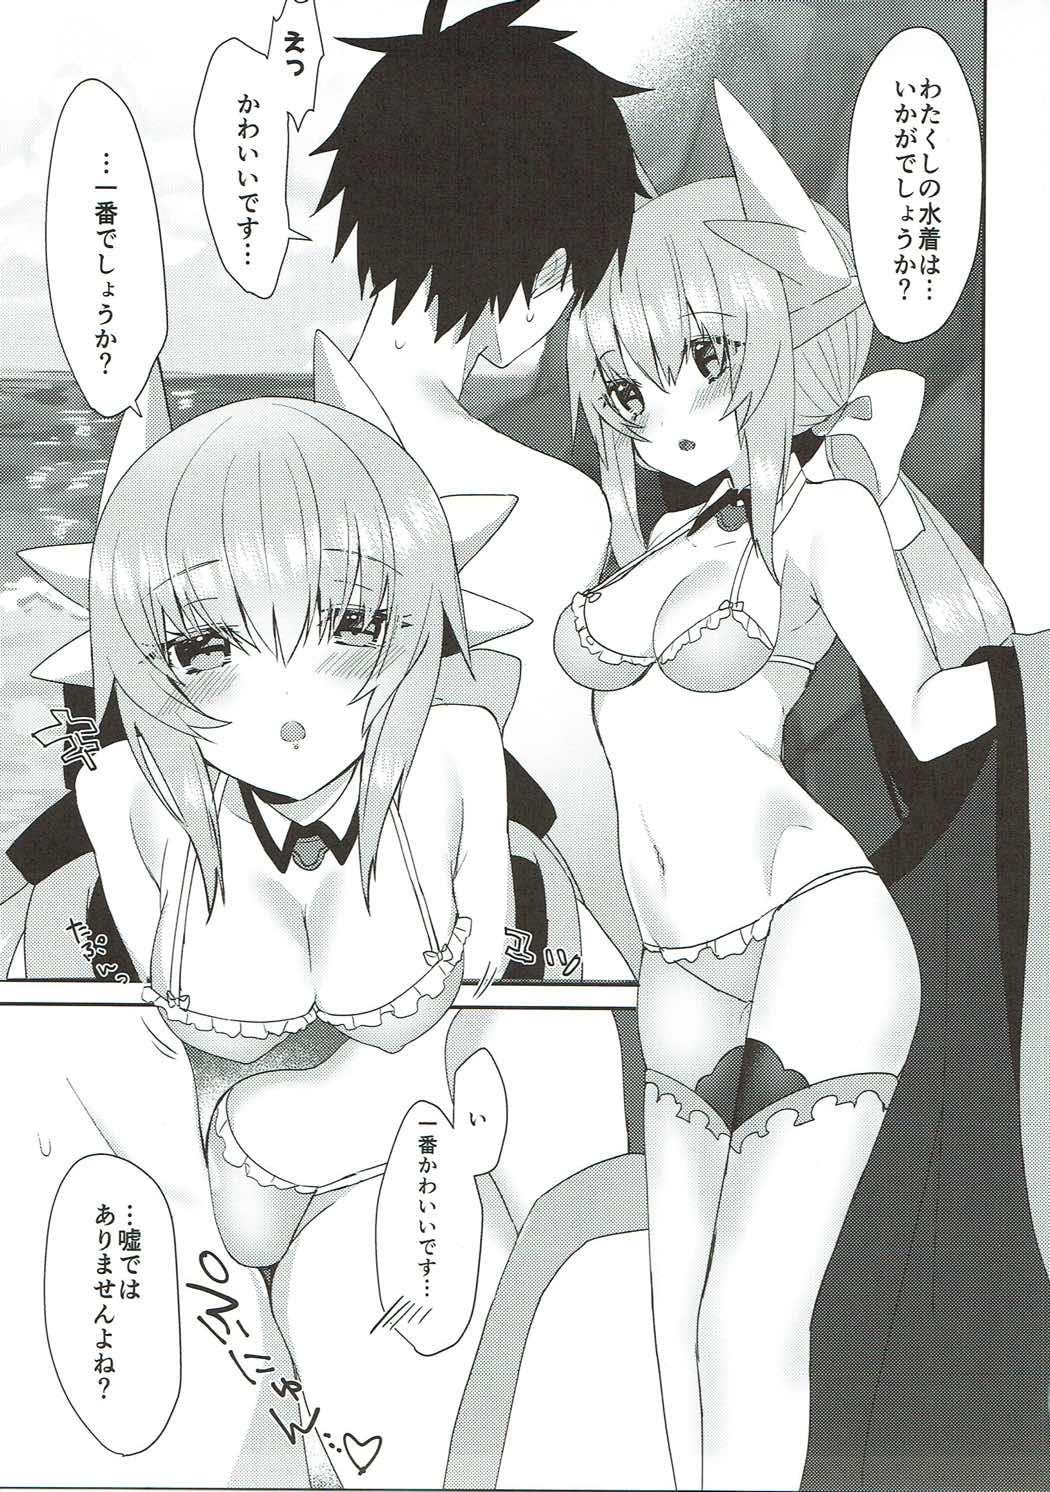 Raw Kiyohime Summer! - Fate grand order Friend - Page 6